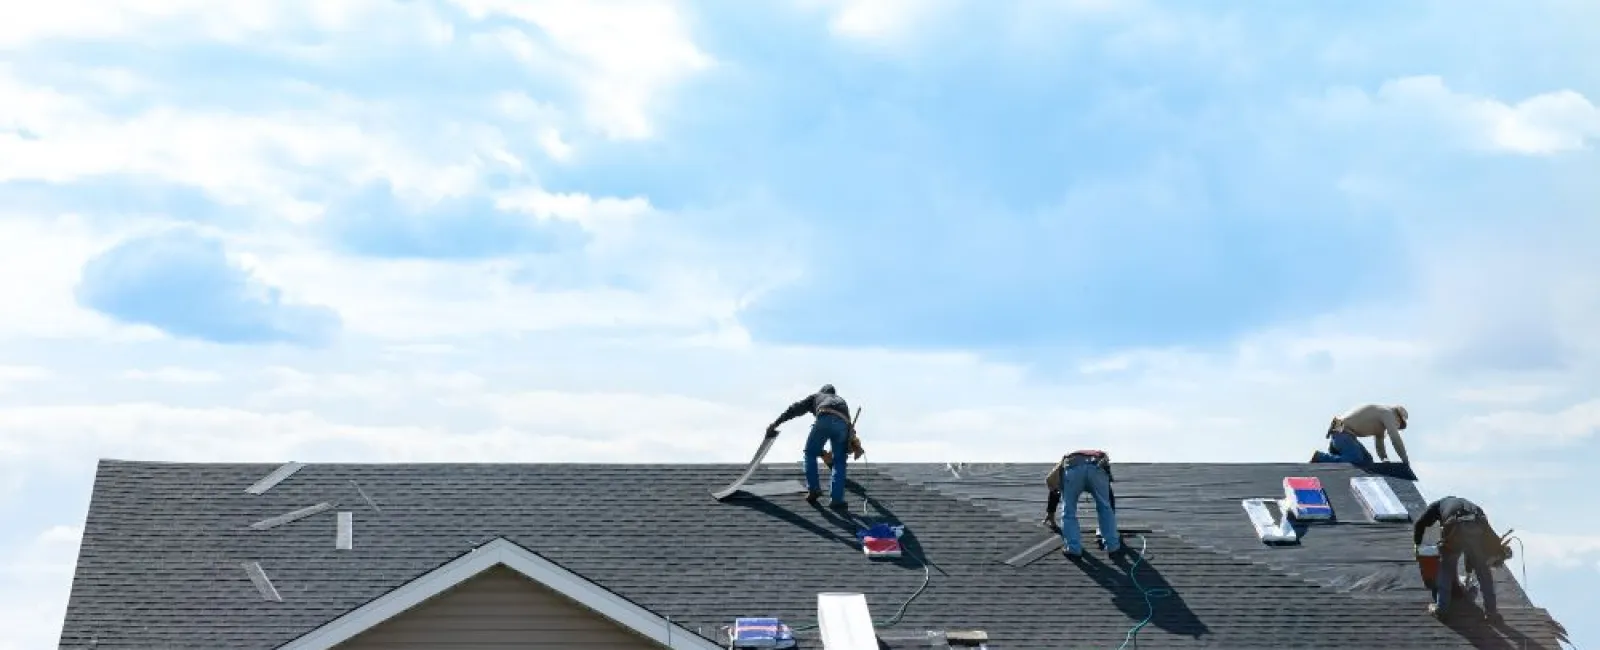 How Do Weather Conditions Impact Your Roof?